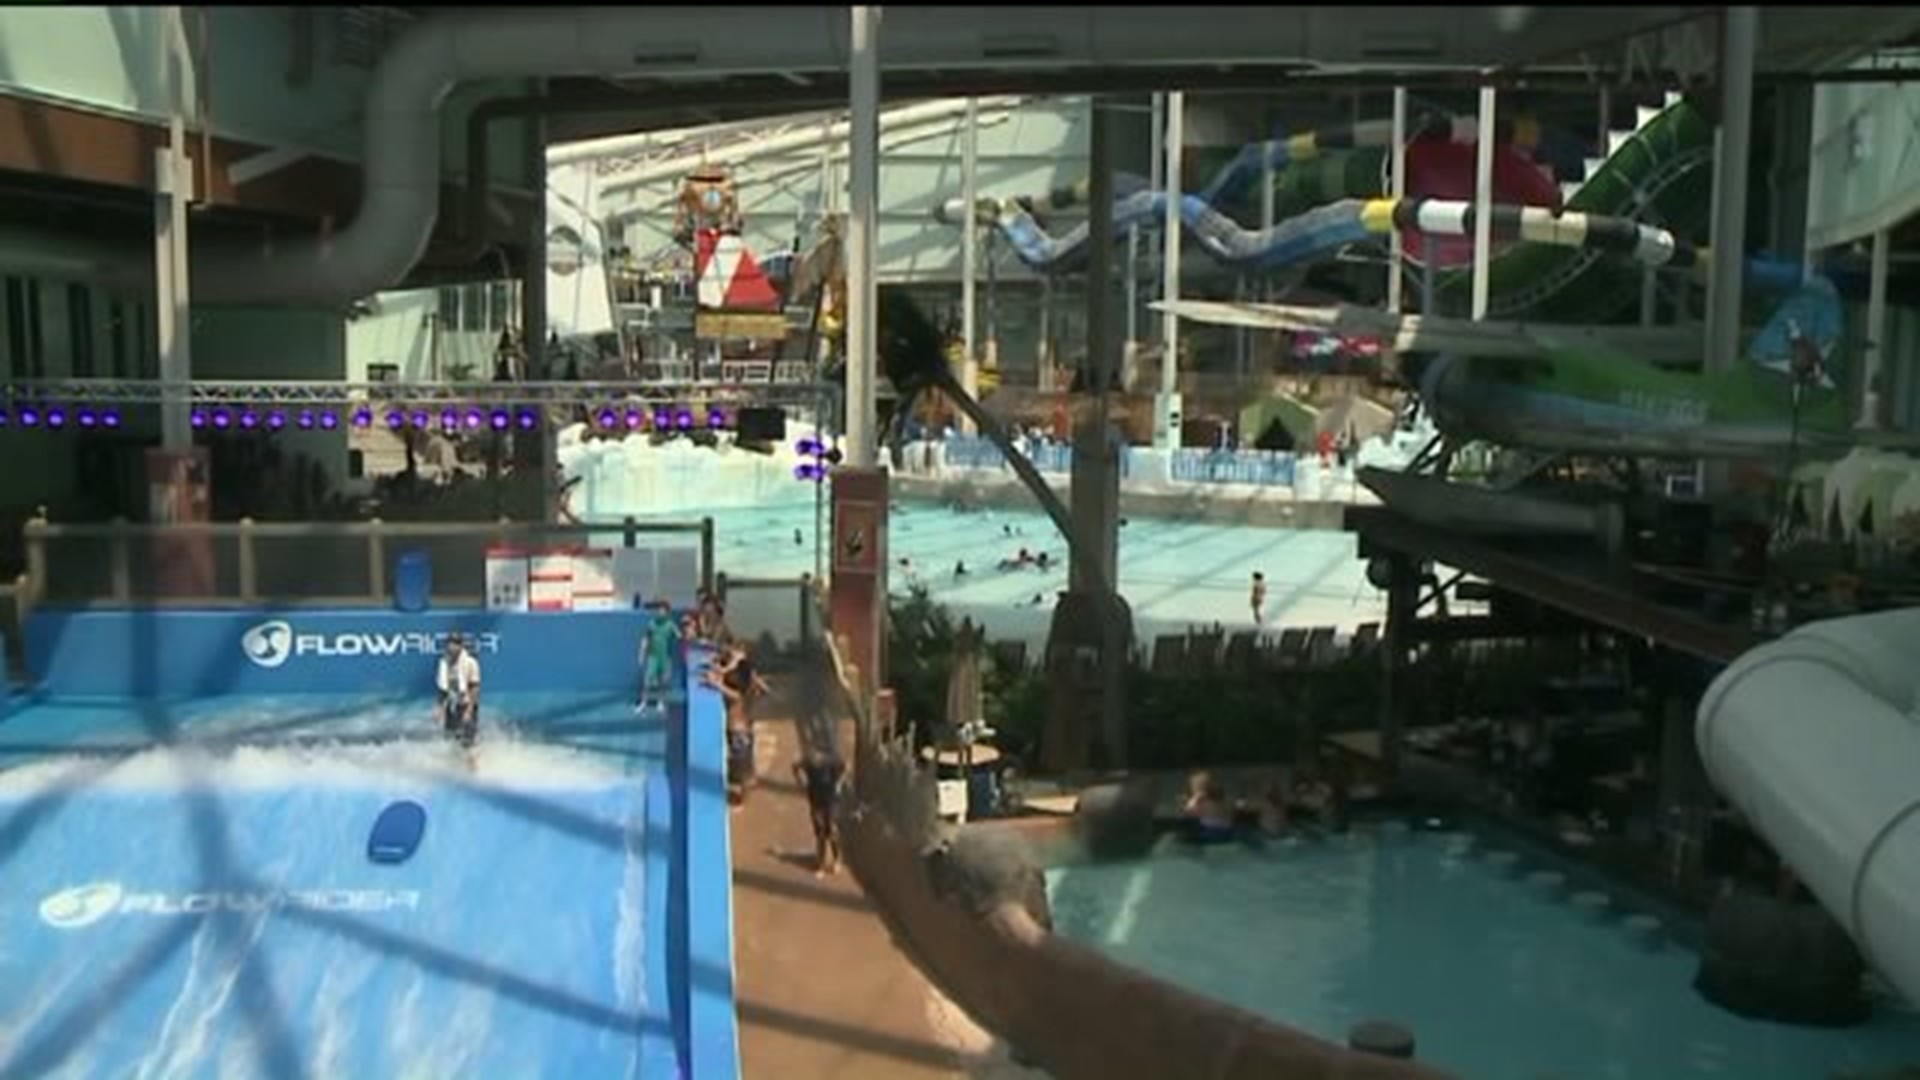 Indoor Waterpark Work Complete at Camelback